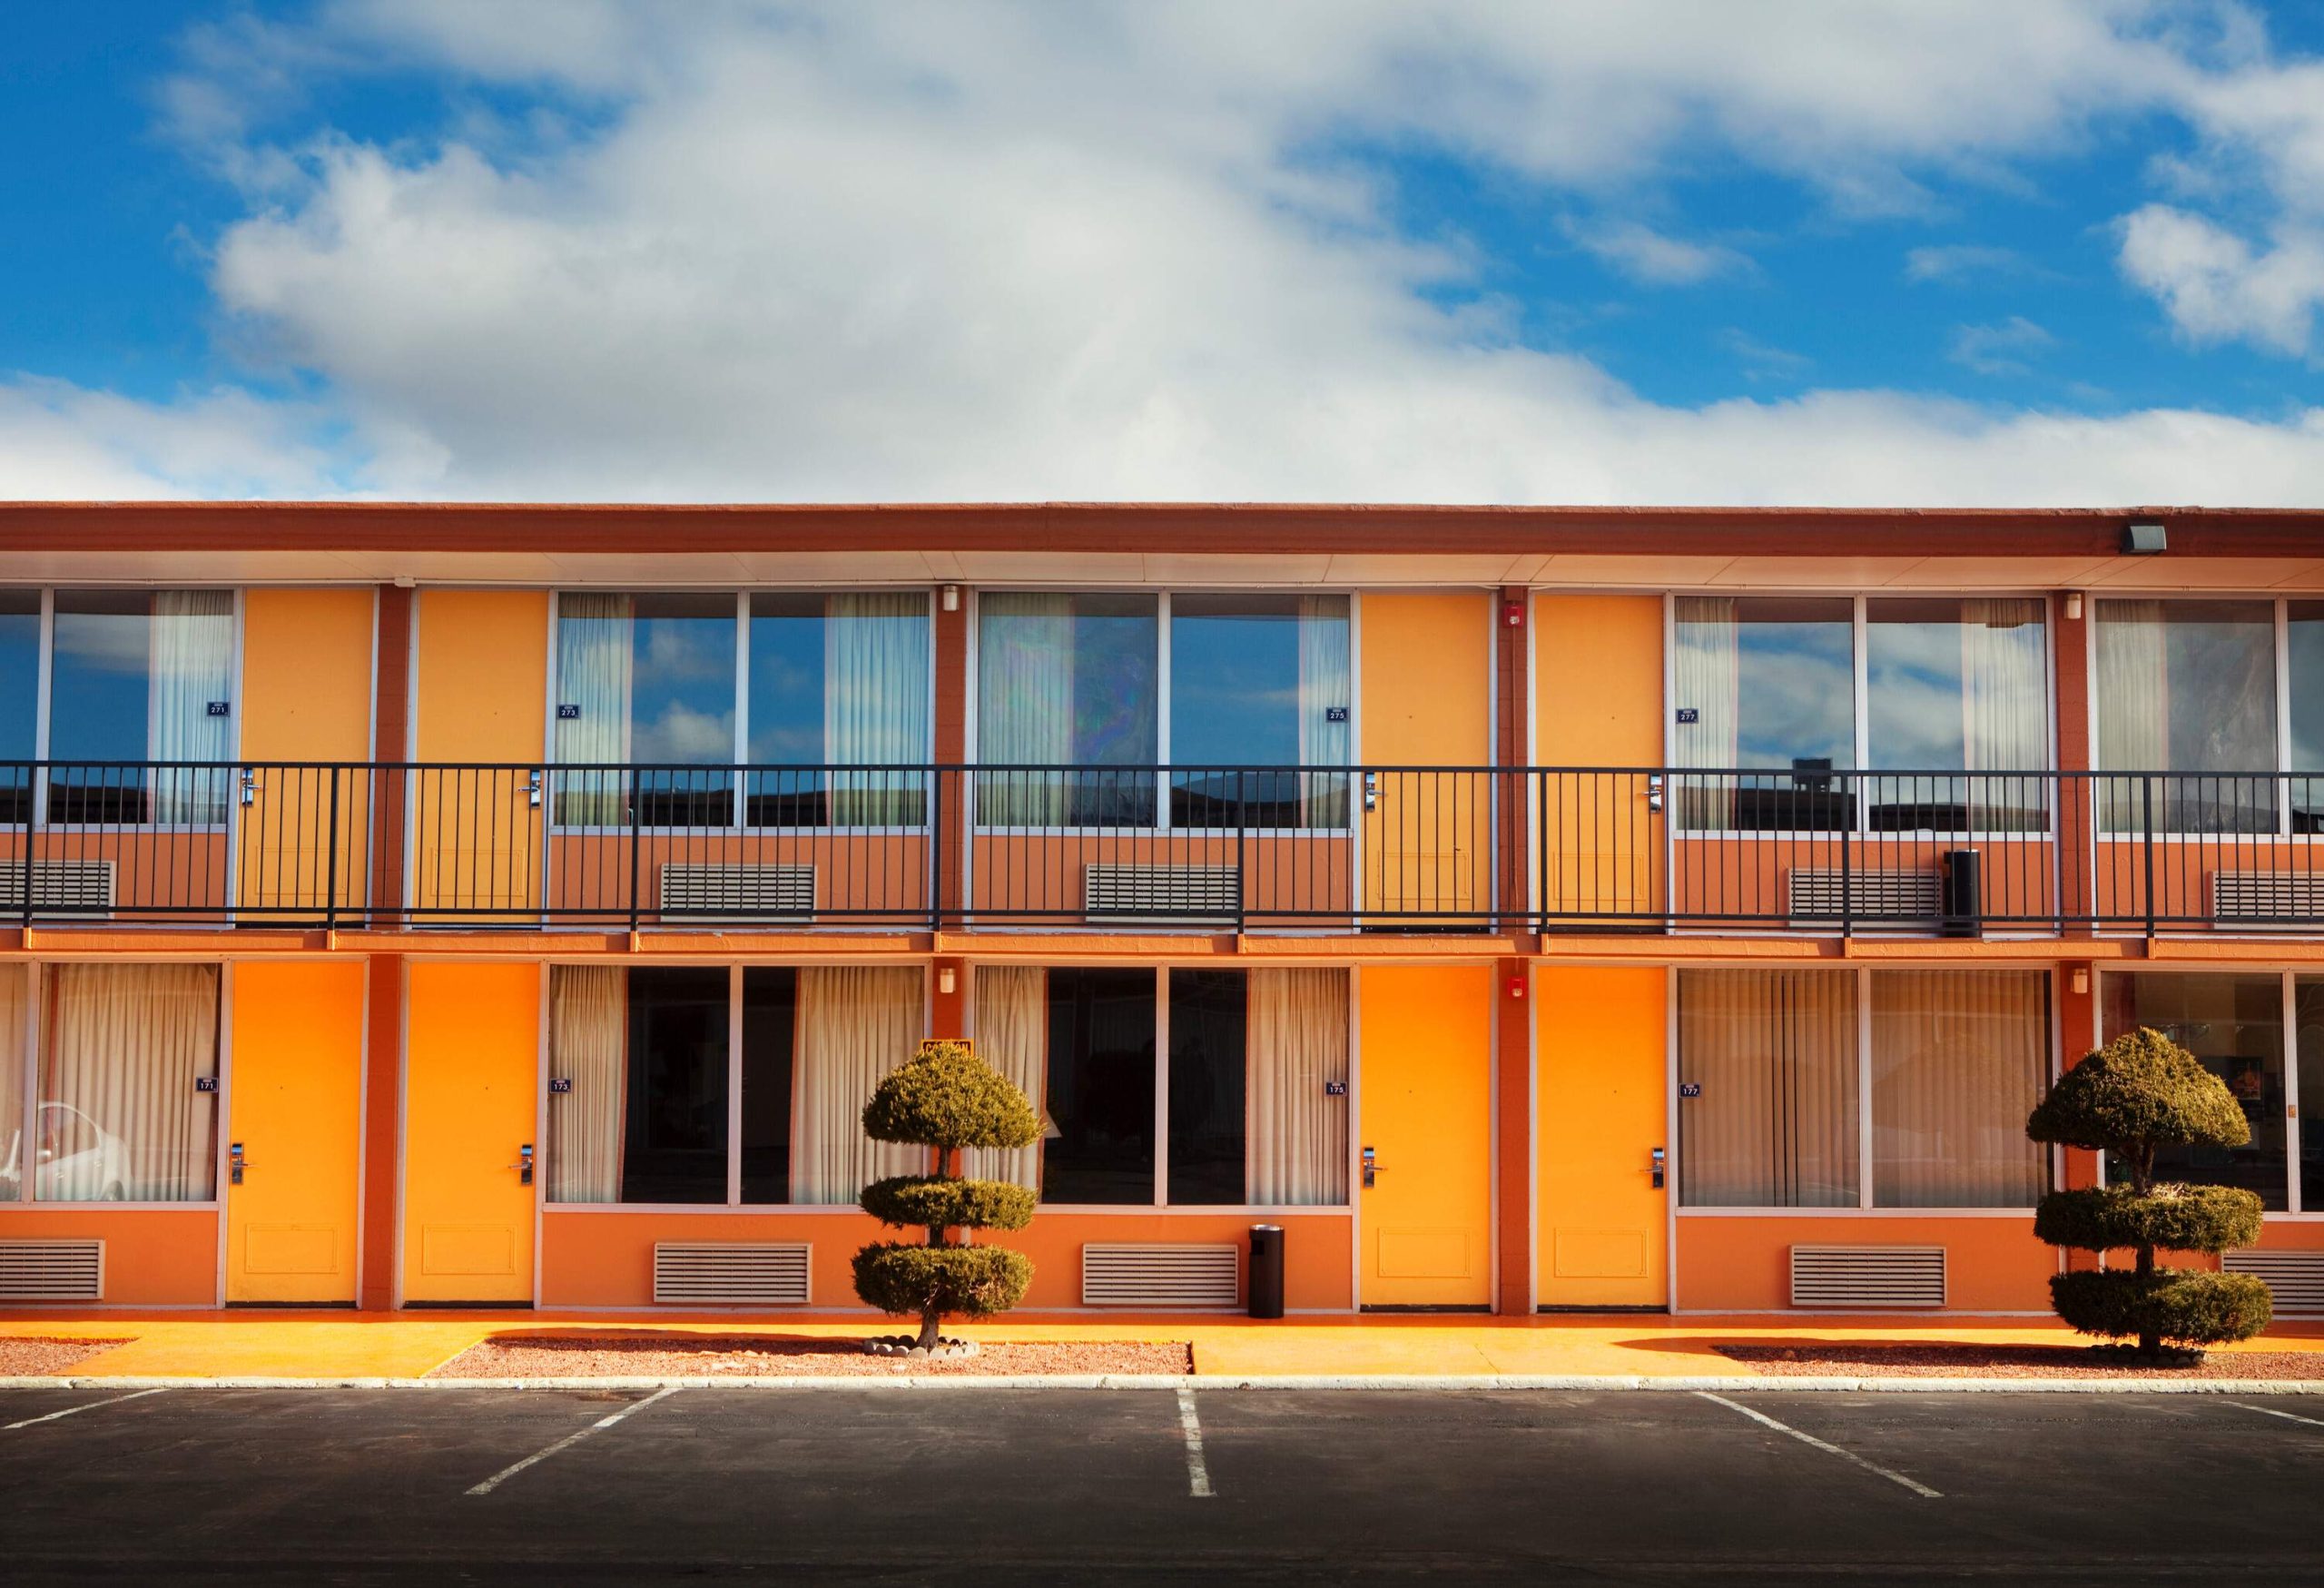 A vibrant motel stands out with its colourful facade, featuring wide glass windows that not only allow abundant natural light to illuminate the interior but also provide a glimpse into the lively atmosphere within.